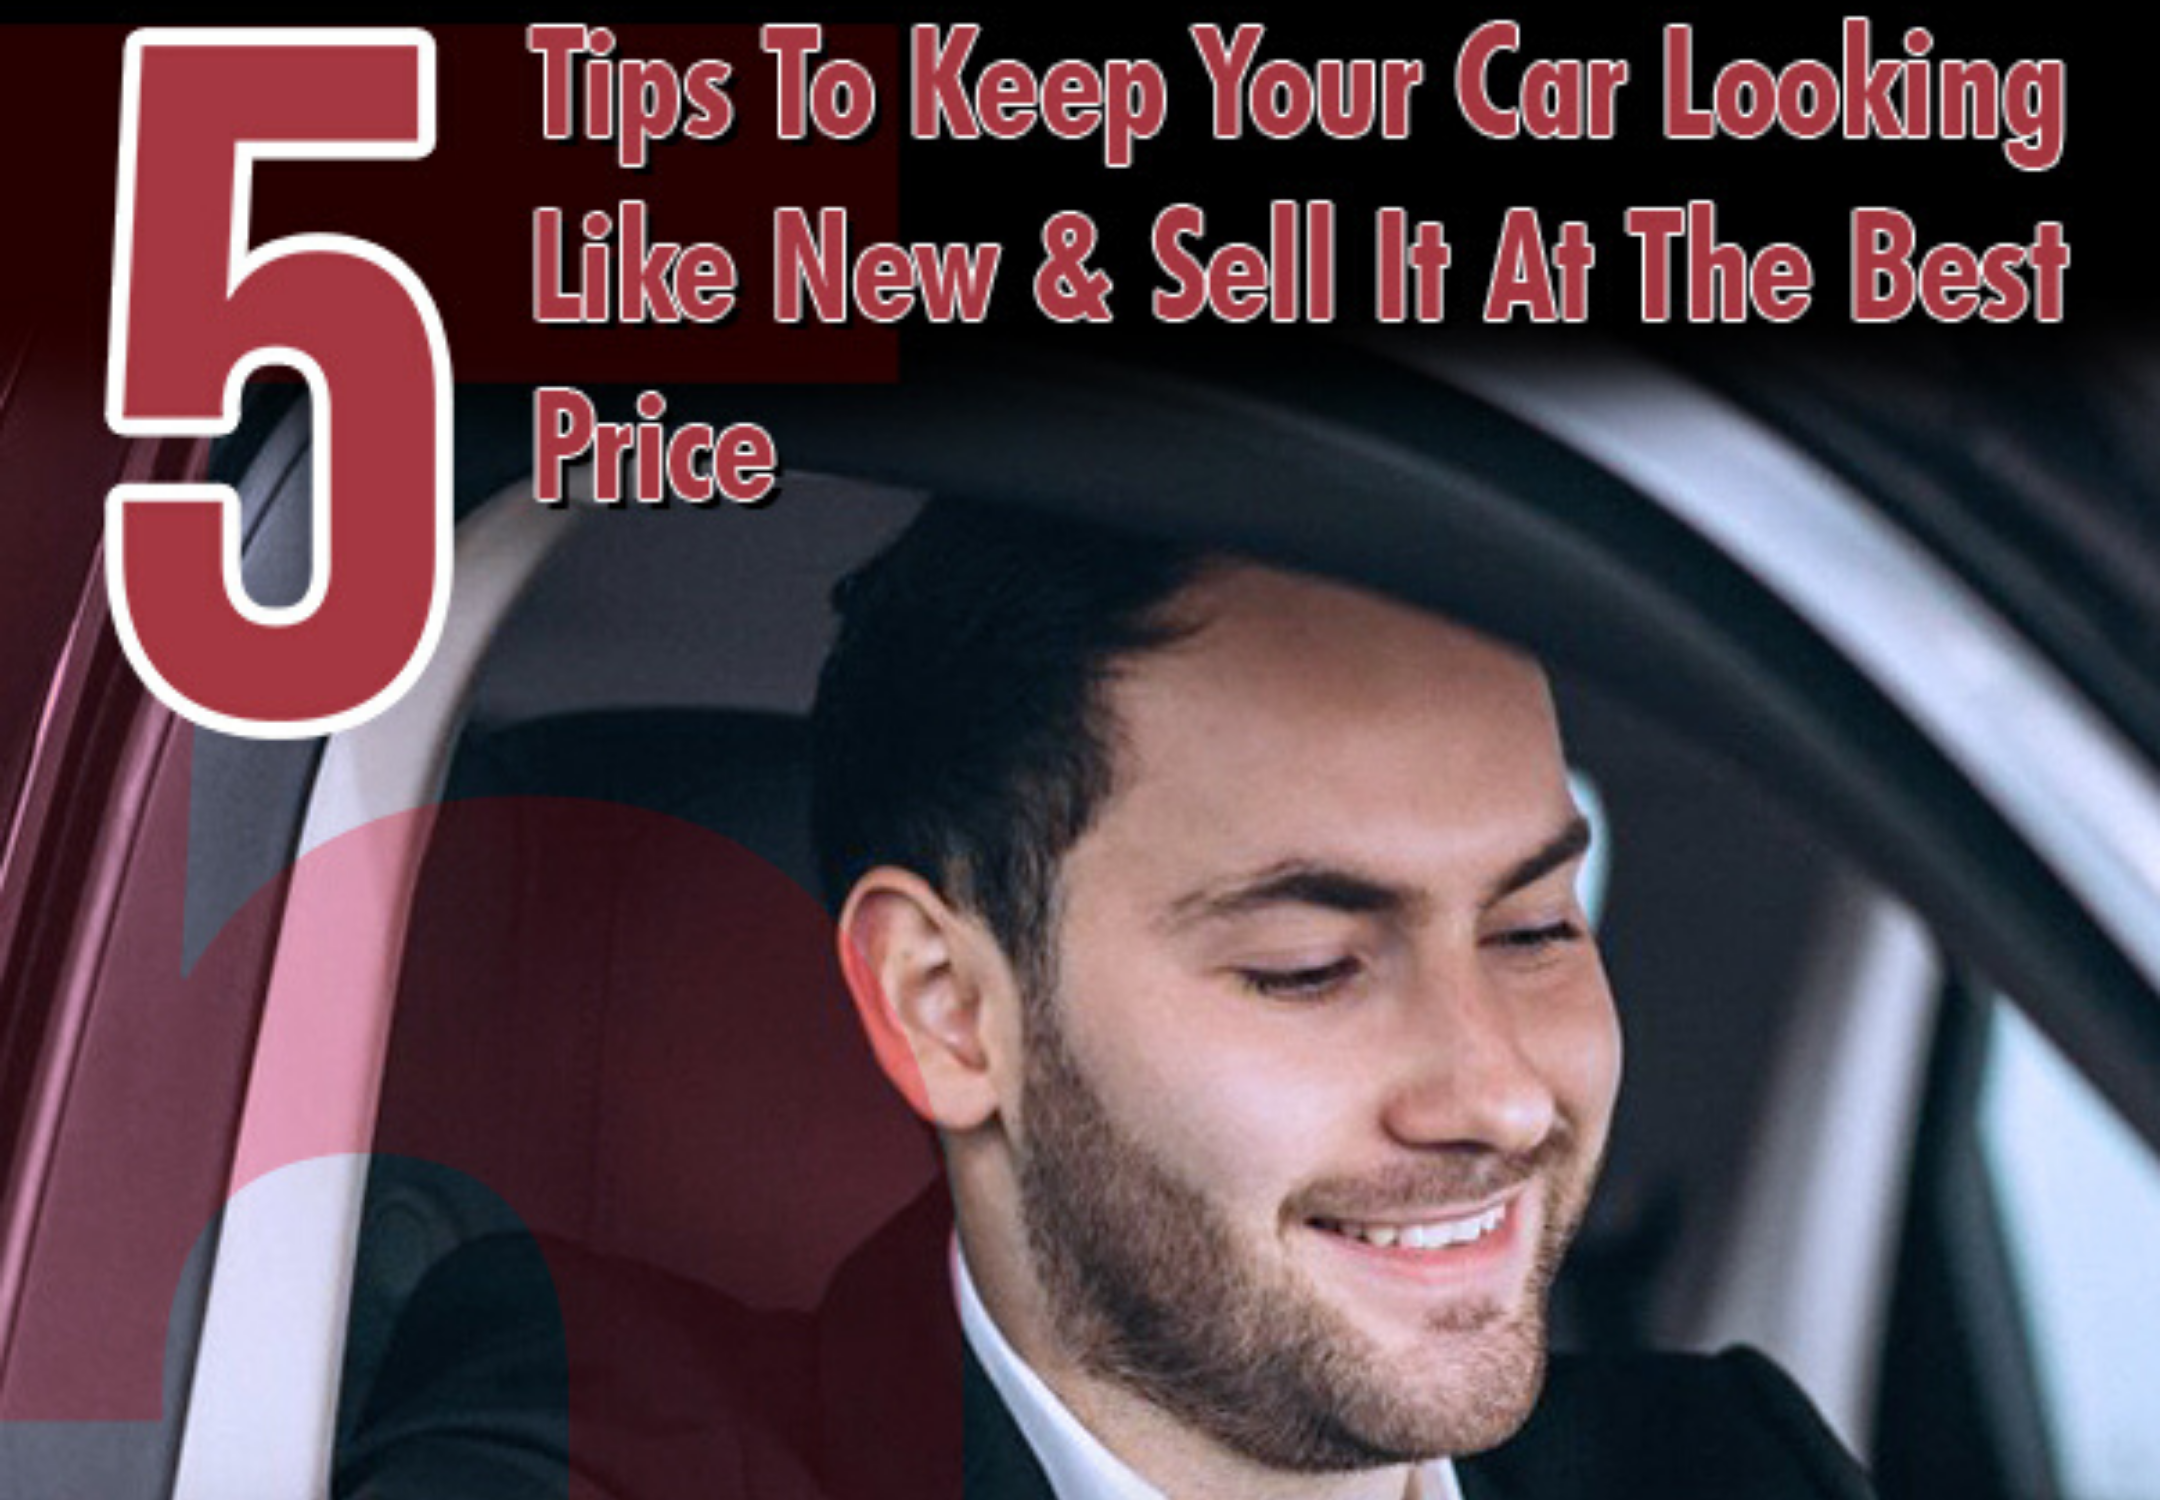 5 Tips to Keep Your Car Looking Like New & Sell It at the Best Price